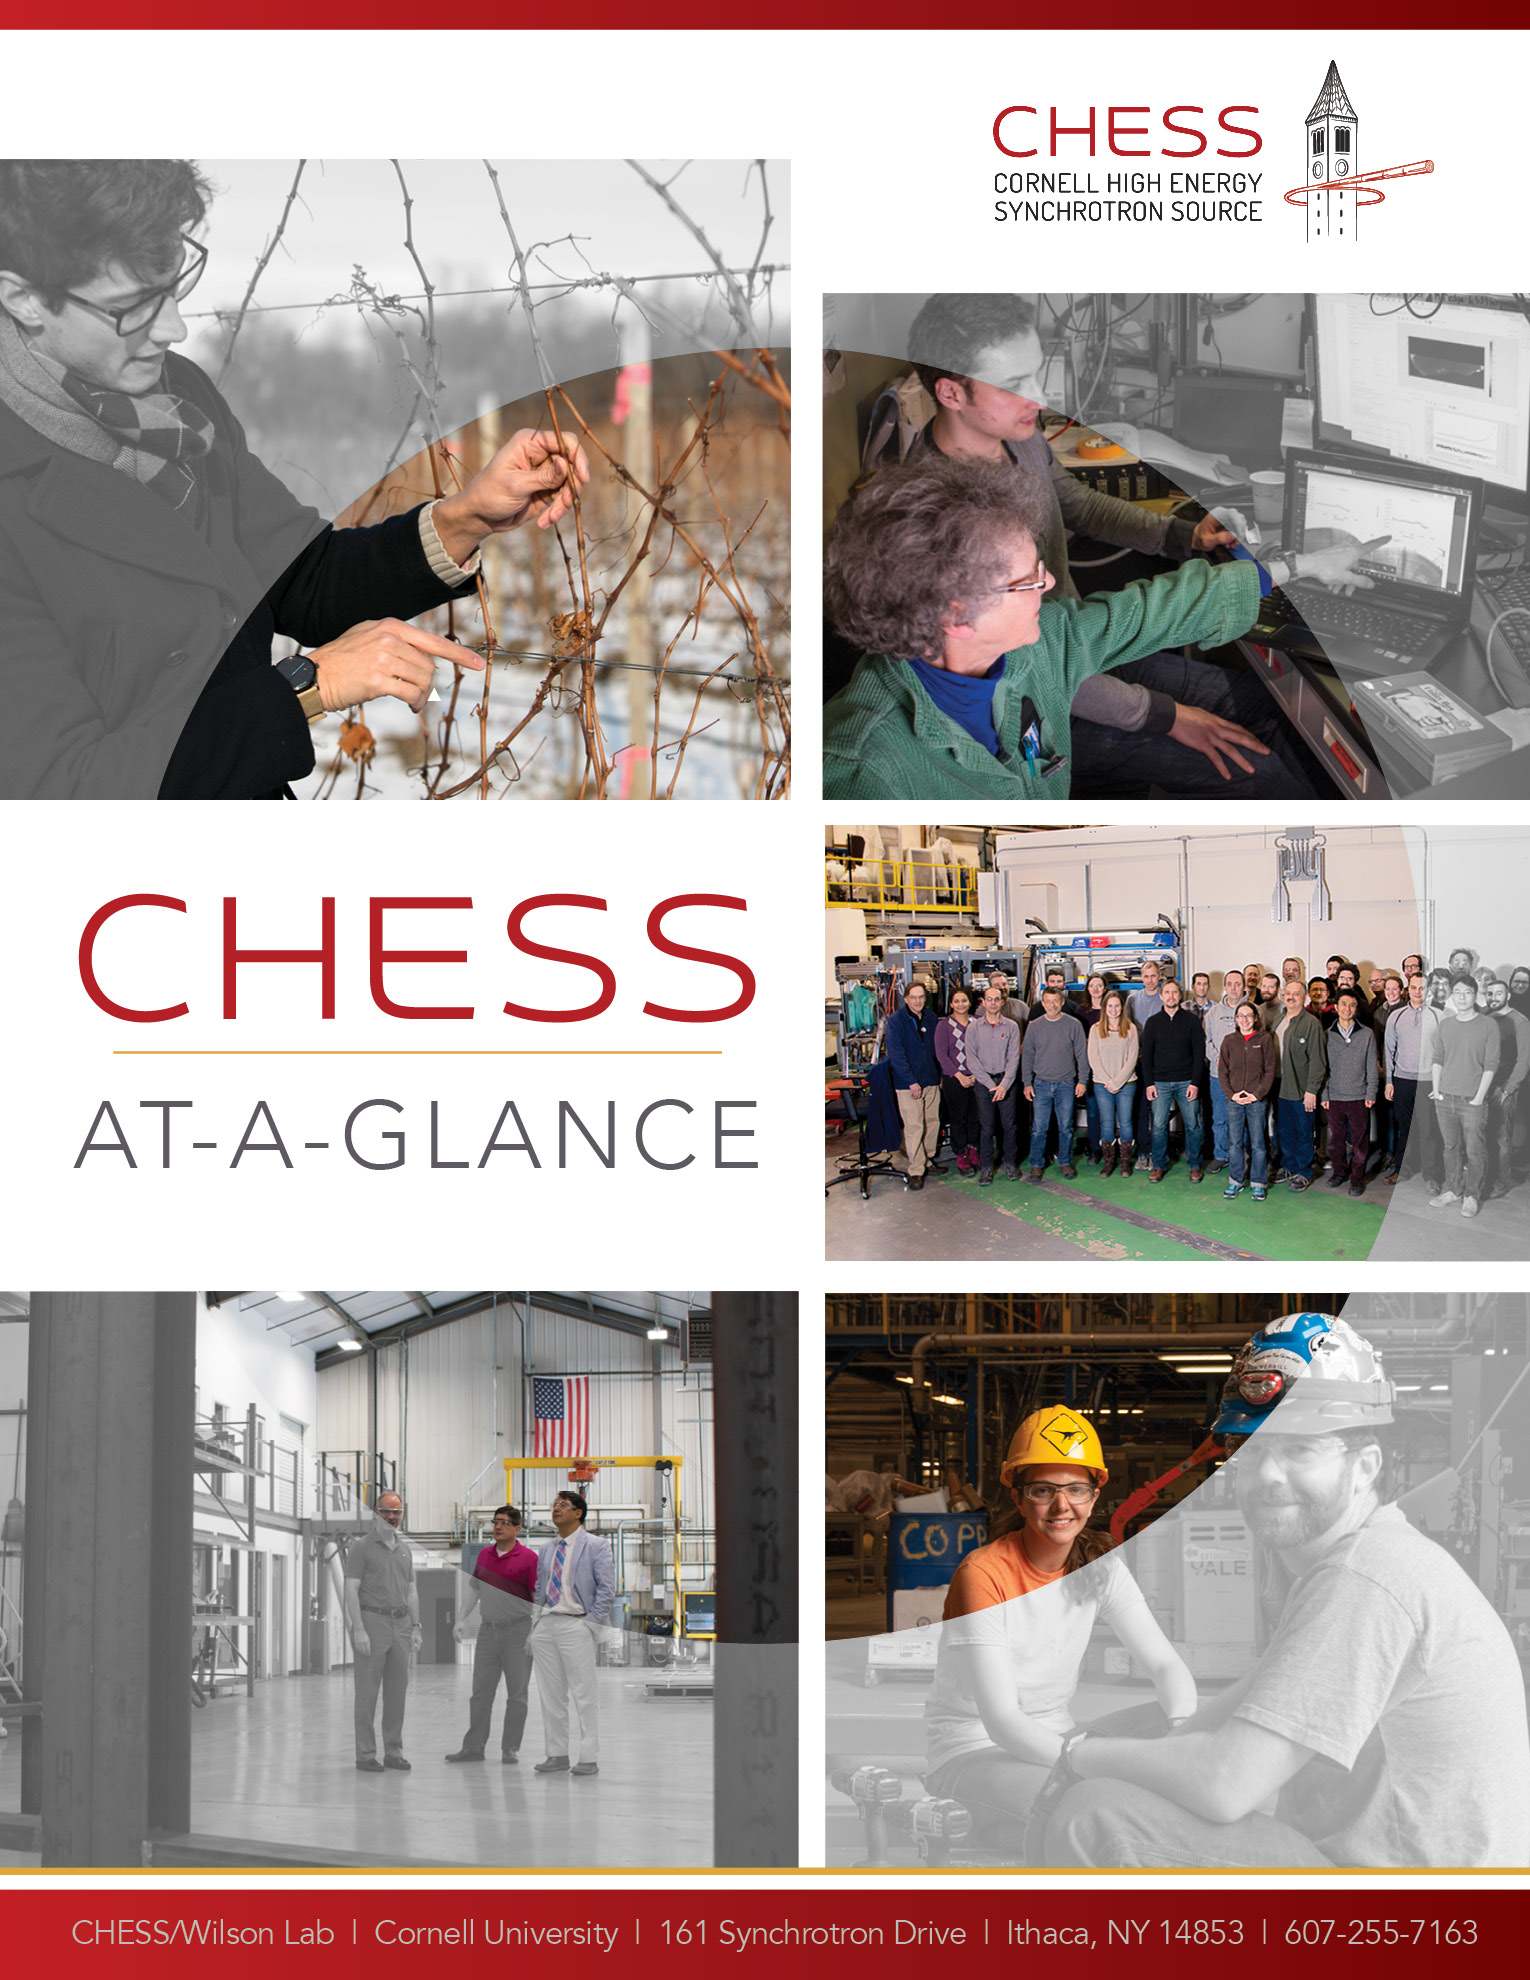 CHESS at a glance